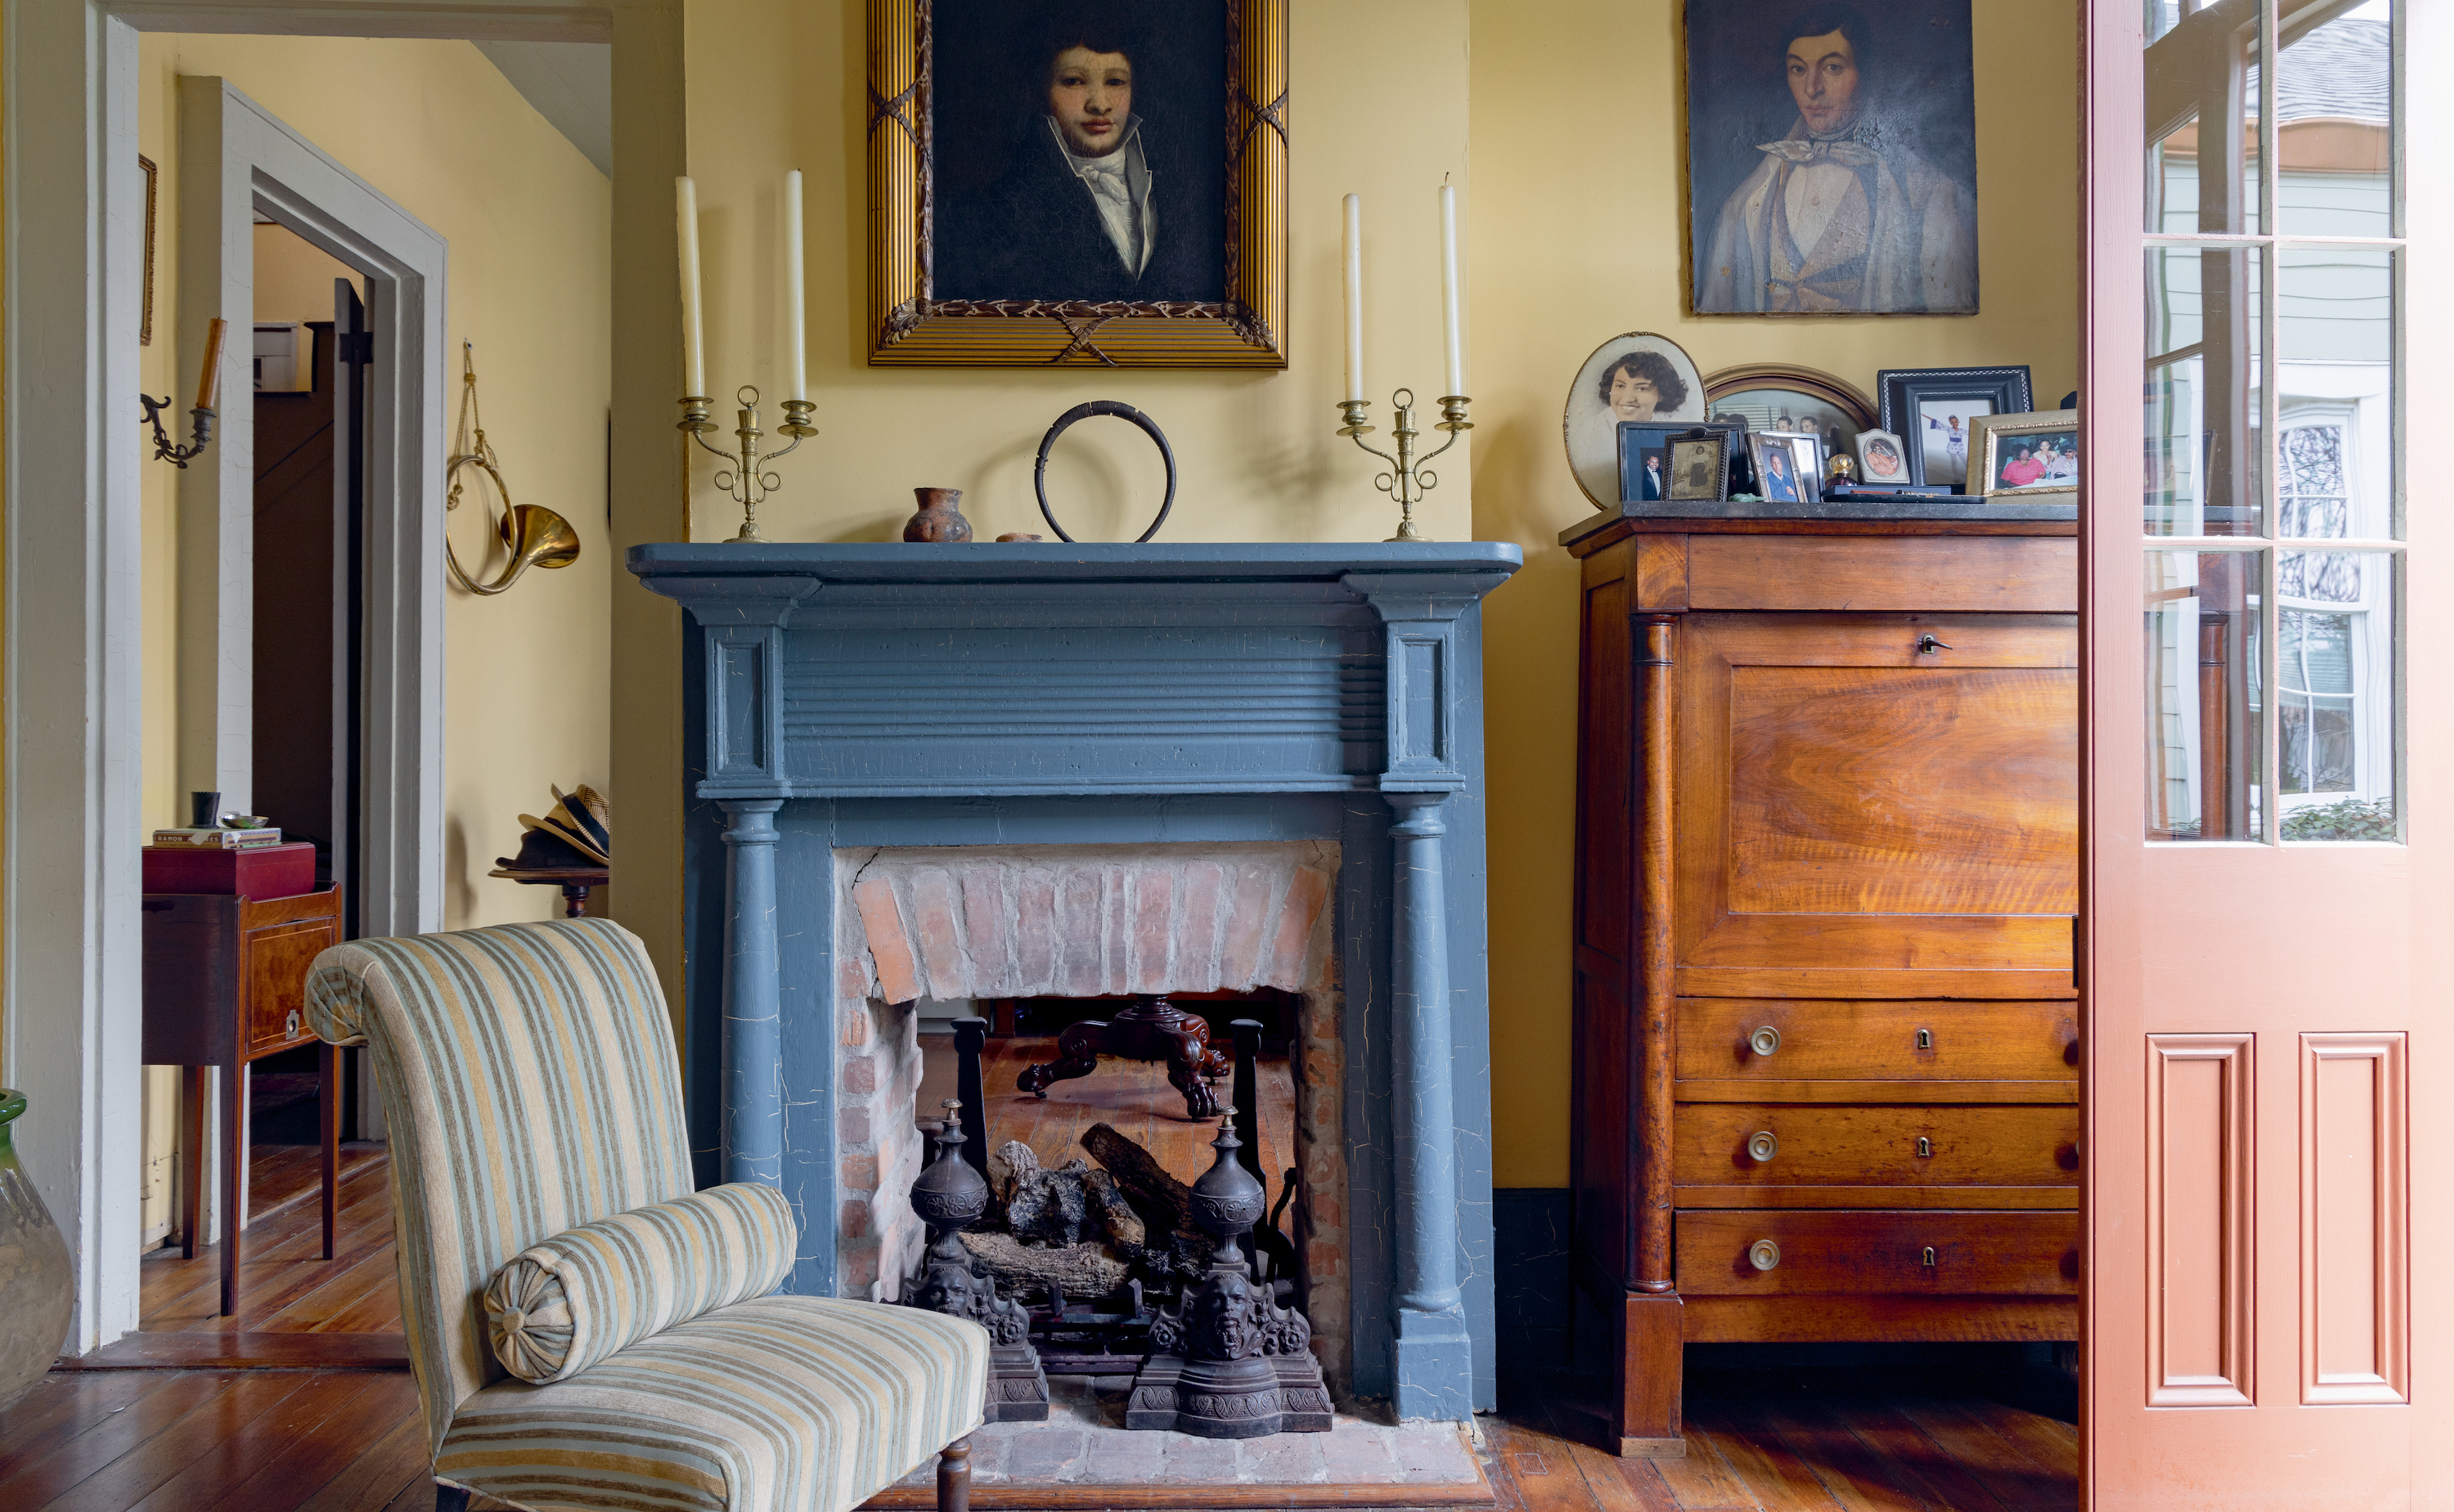 A blue mantle in a butter yellow living room. There are oil portraits of men and candle sticks decorating the room,